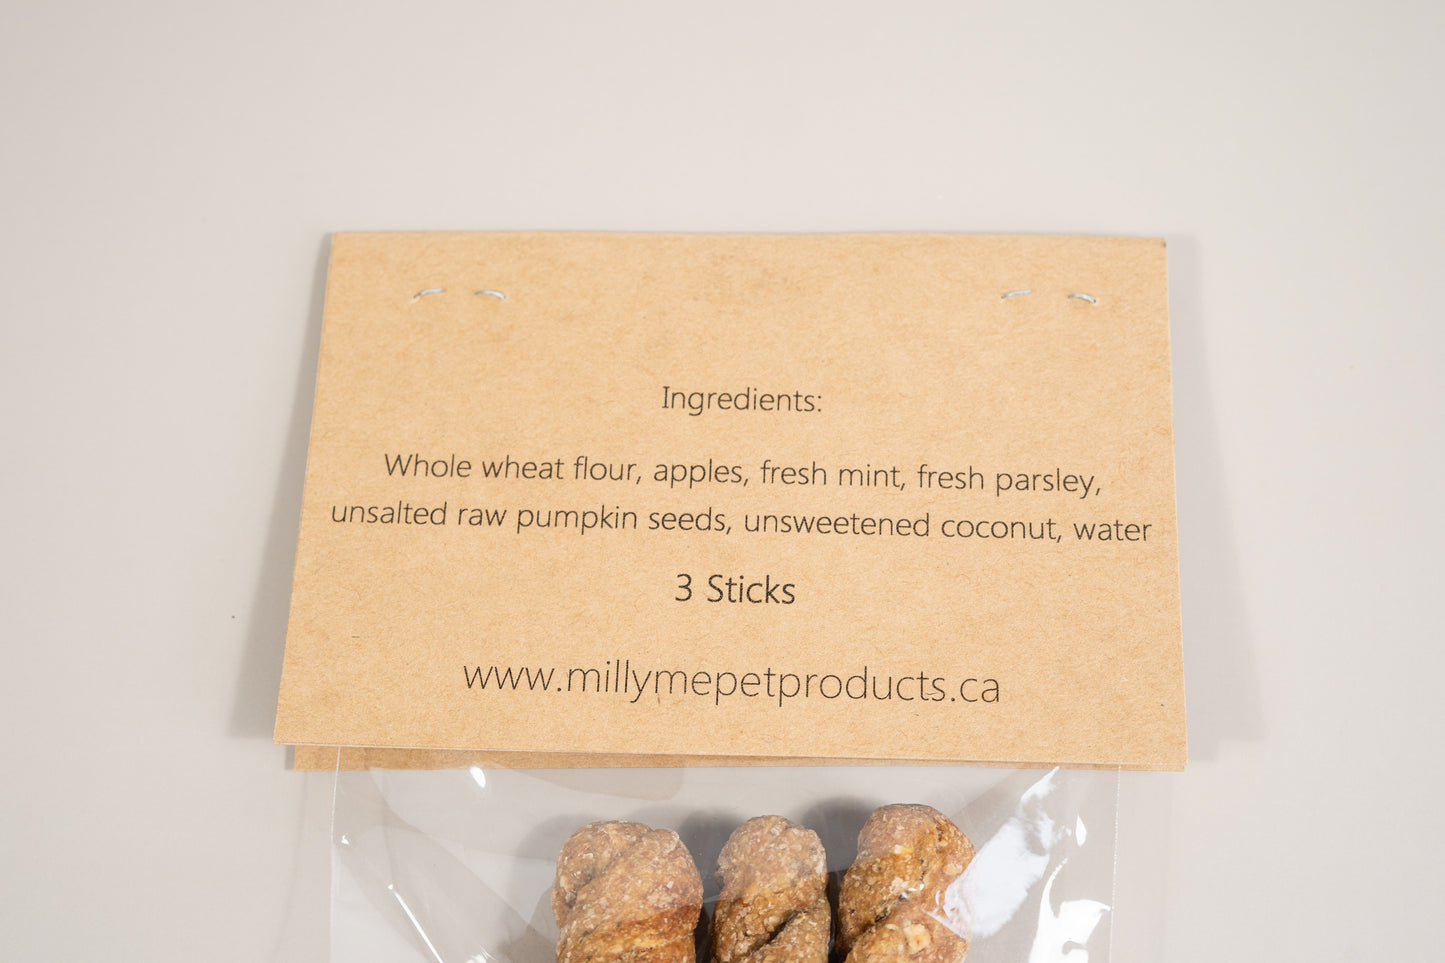 Twisted sticks for dogs are made with whole wheat flour, apples, fresh mint, fresh parsley, unsalted raw pumpkin seeds, unsweetened coconut and water.